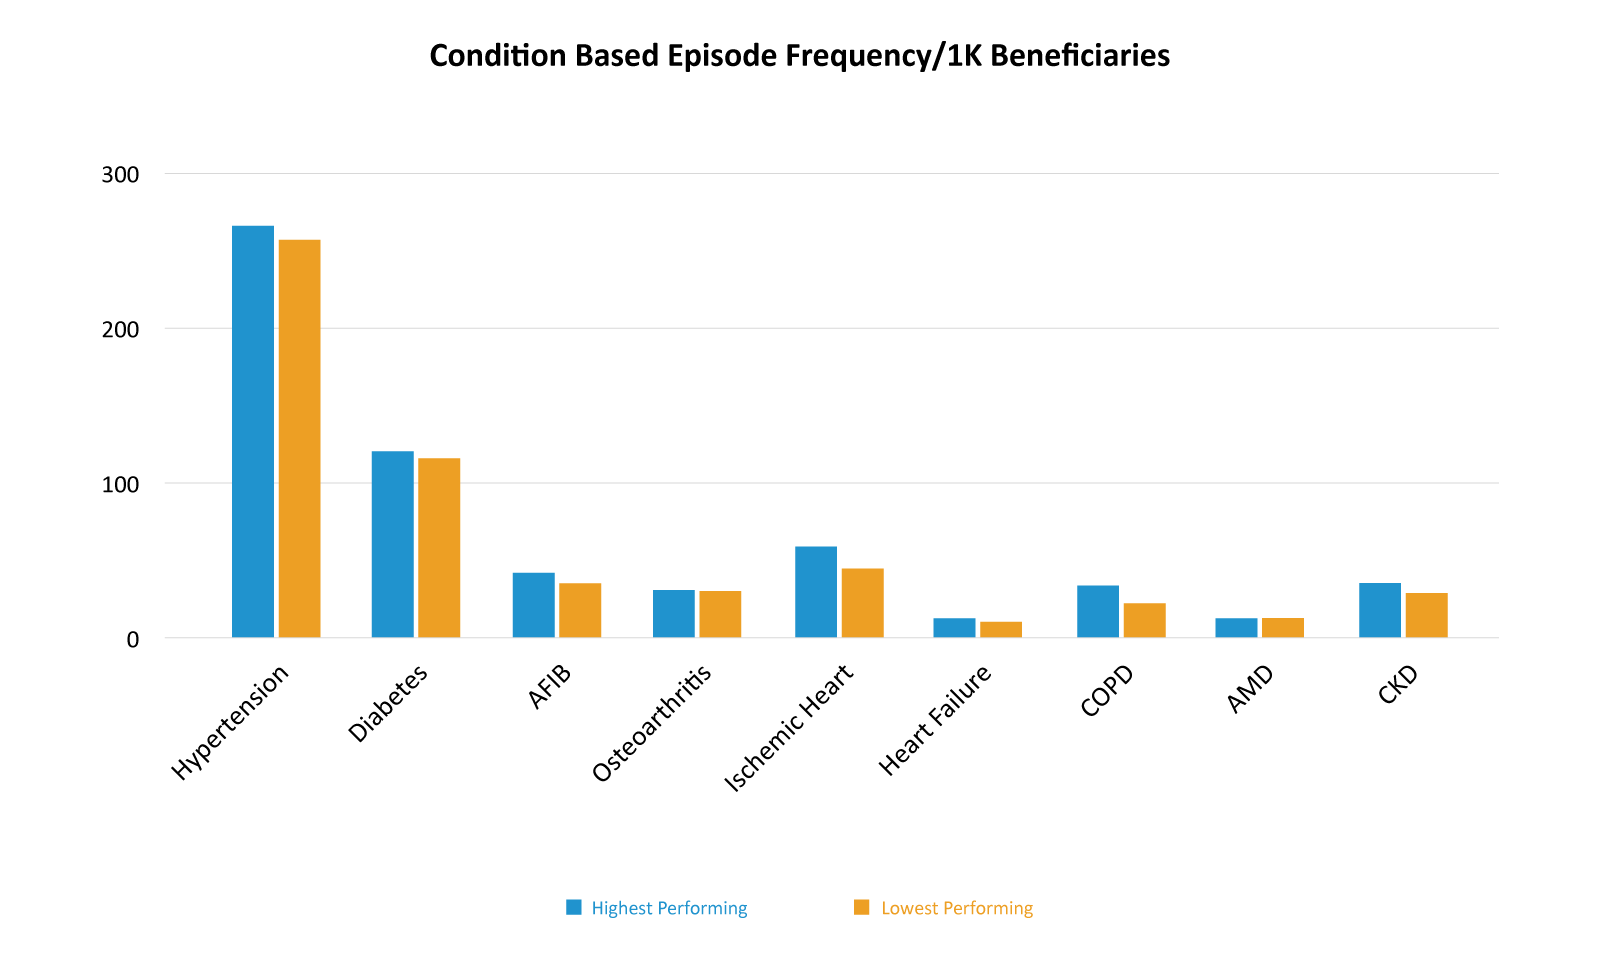 Condition Based Episode Frequency/1K Beneficiaries